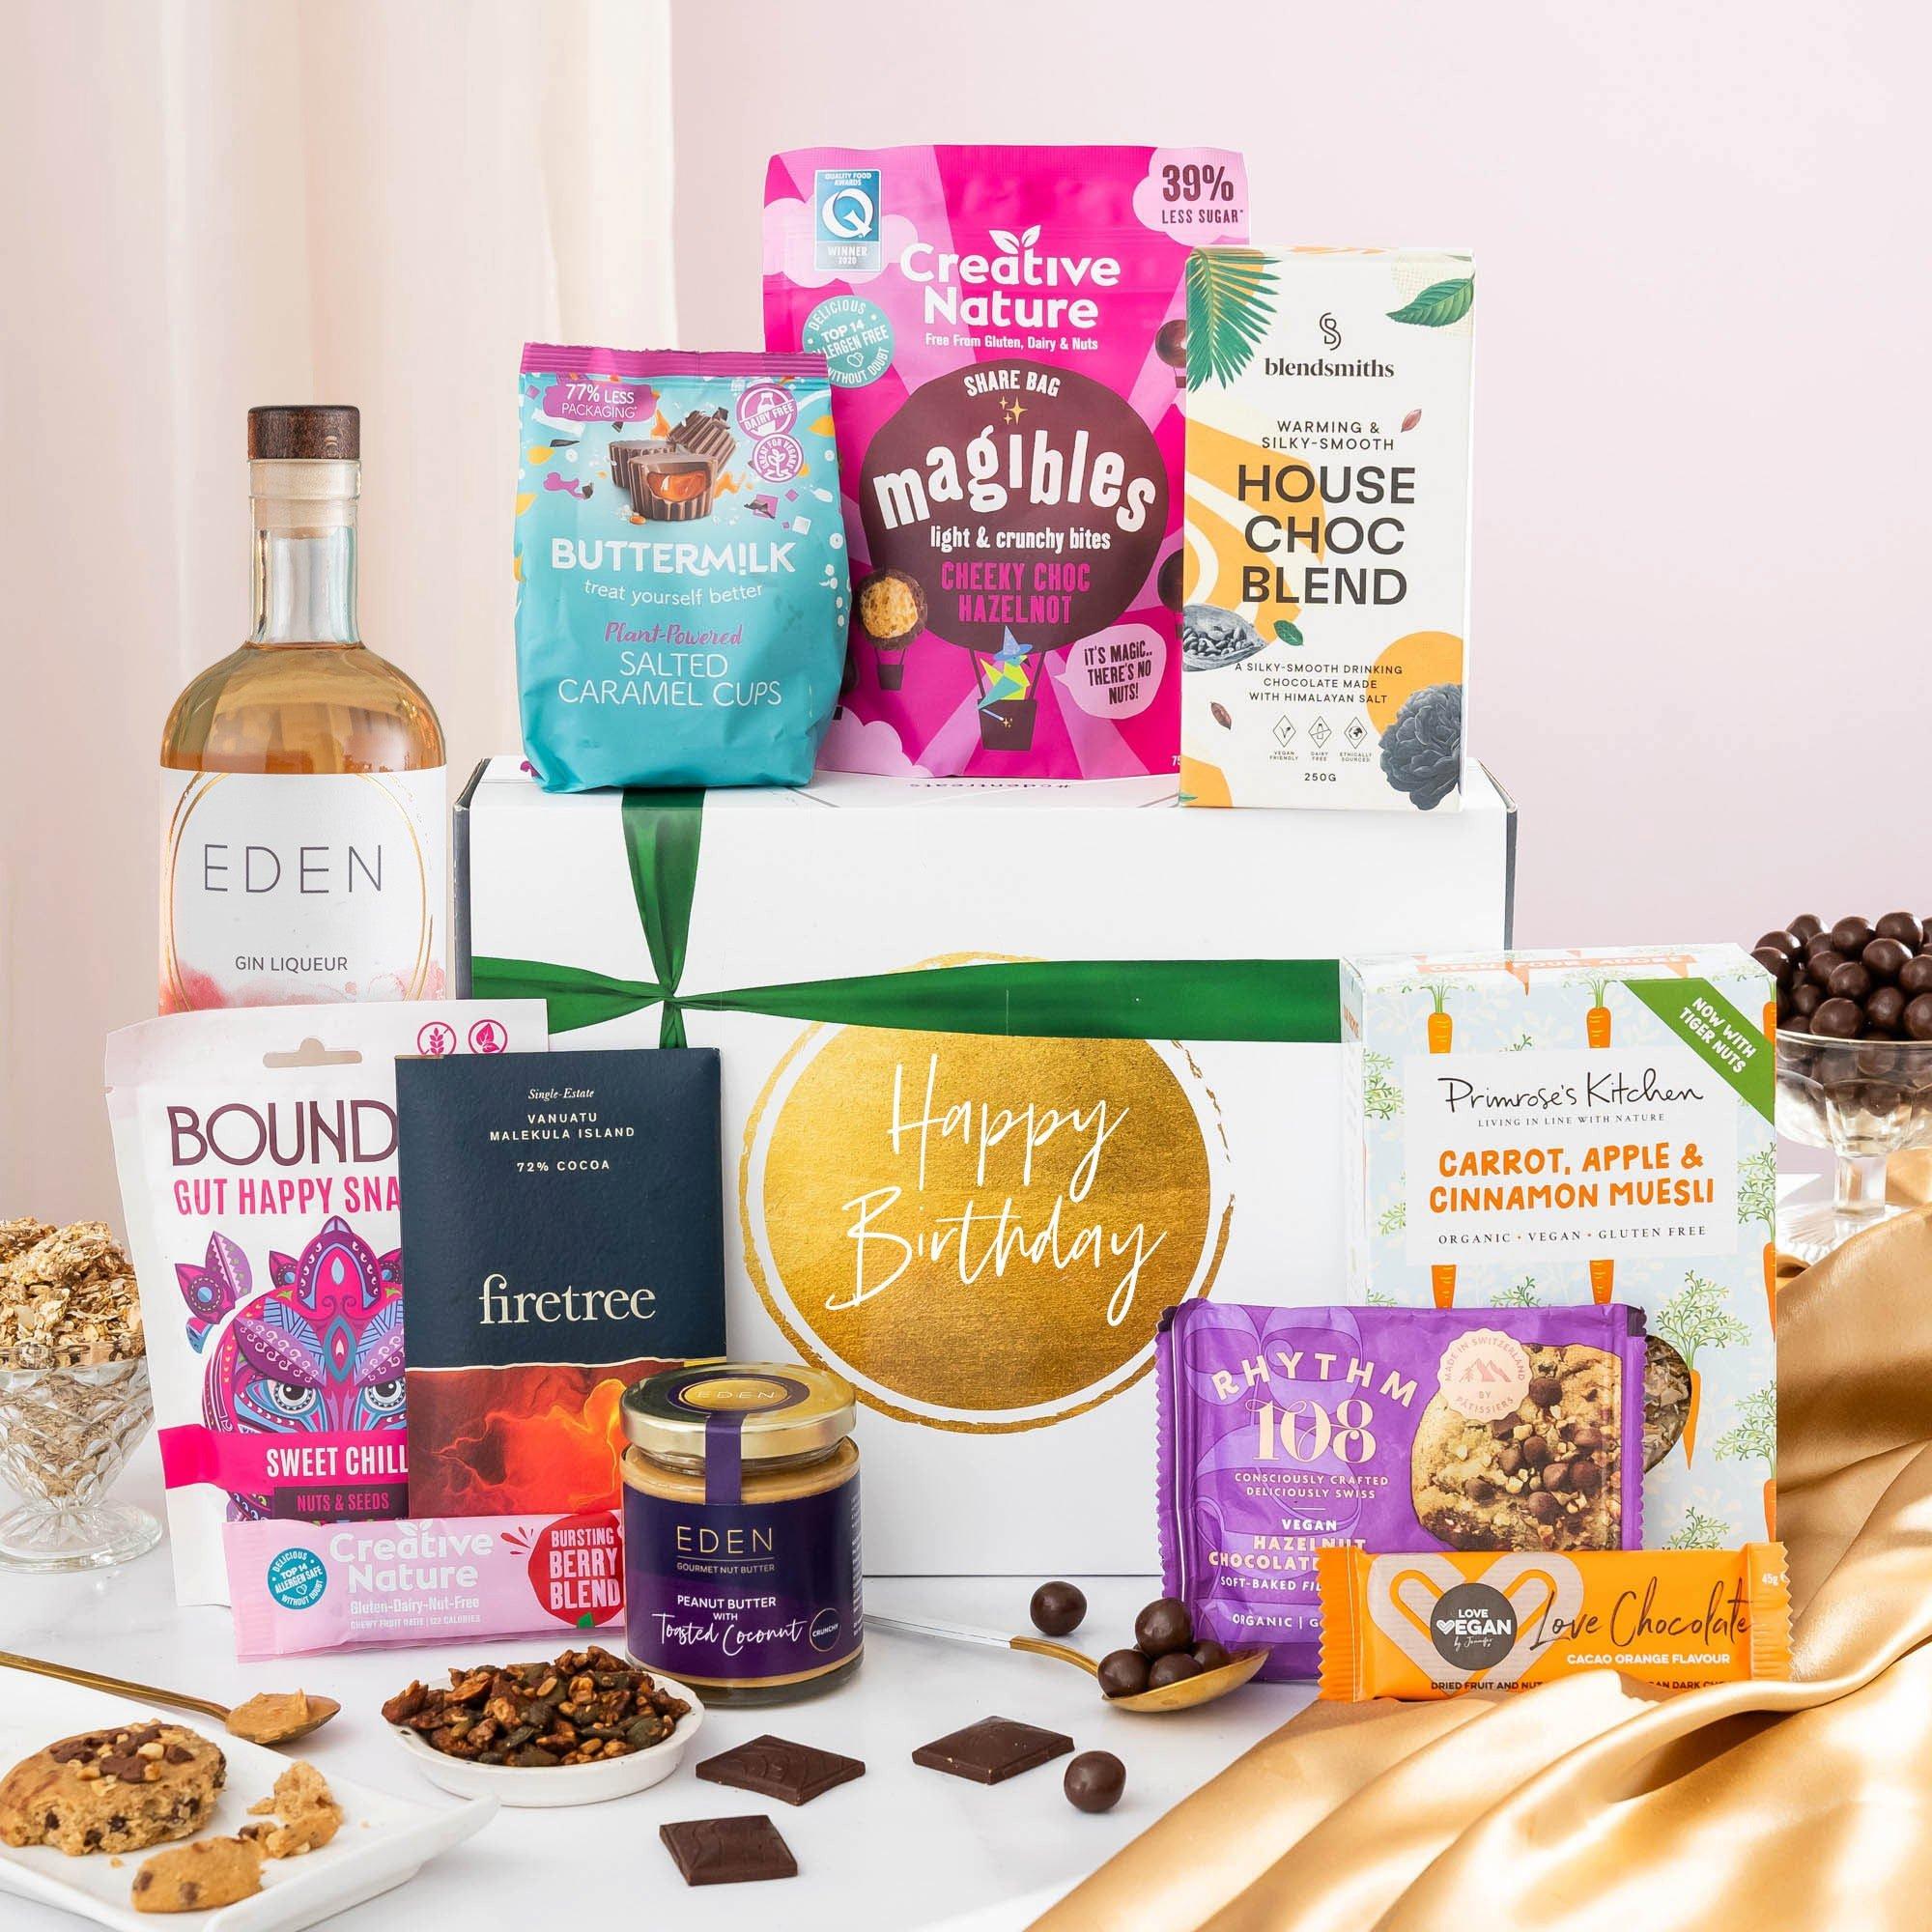 Happy Birthday Food & Drink Gift Hamper with EDEN Limited Edition Rhubarb & Ginger Gin Liqueur (350m